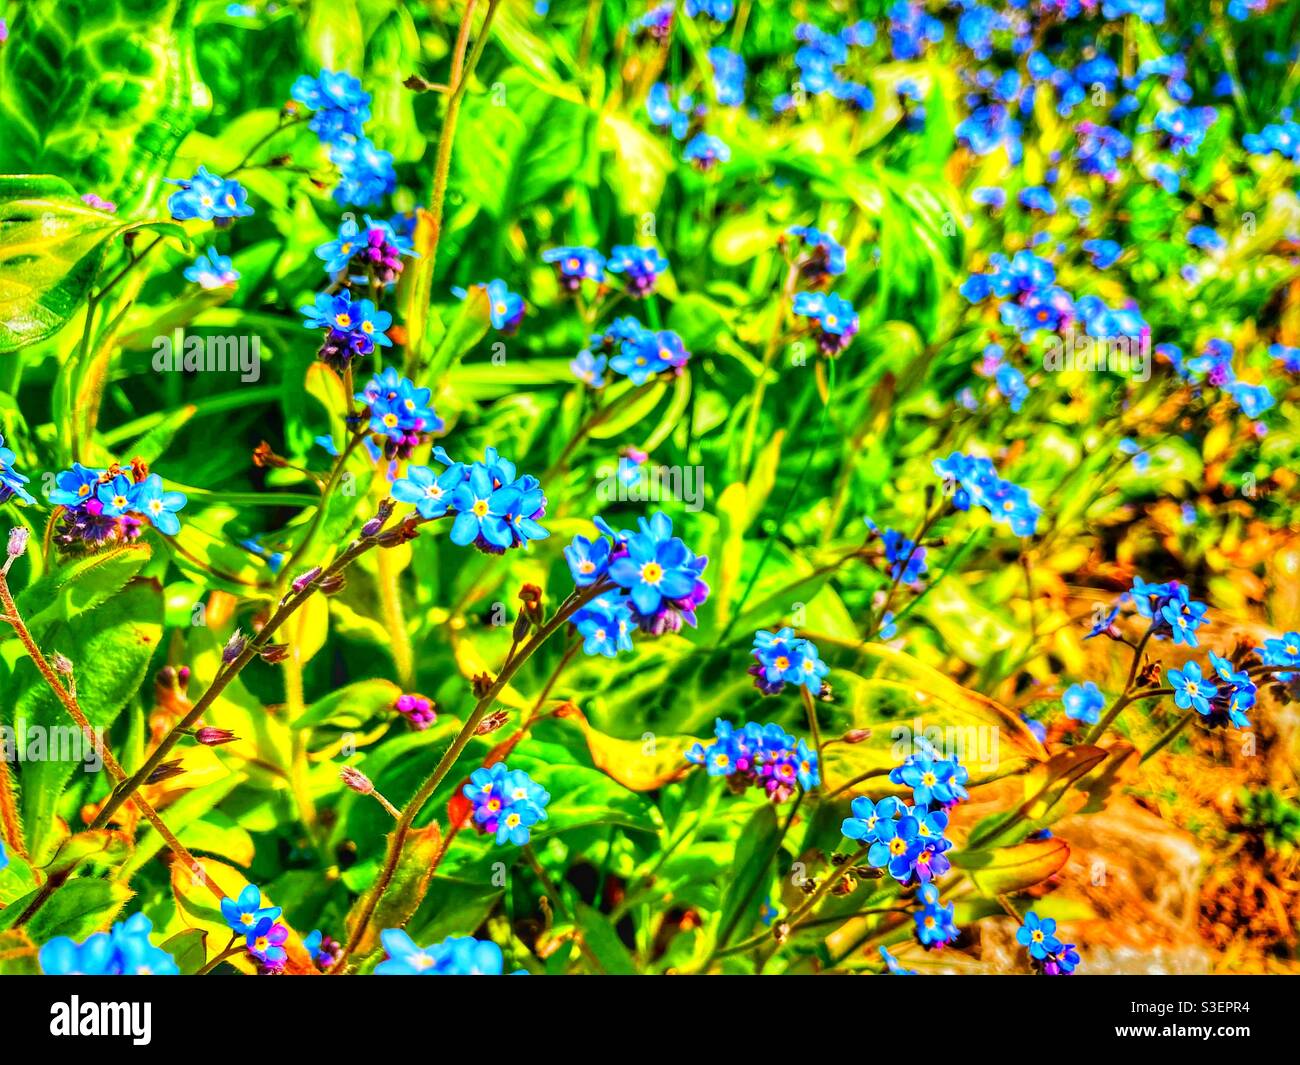 Blue forget-me-nots ( also known an scorpion grass and myosotis) flowering in the garden in bright colours Stock Photo